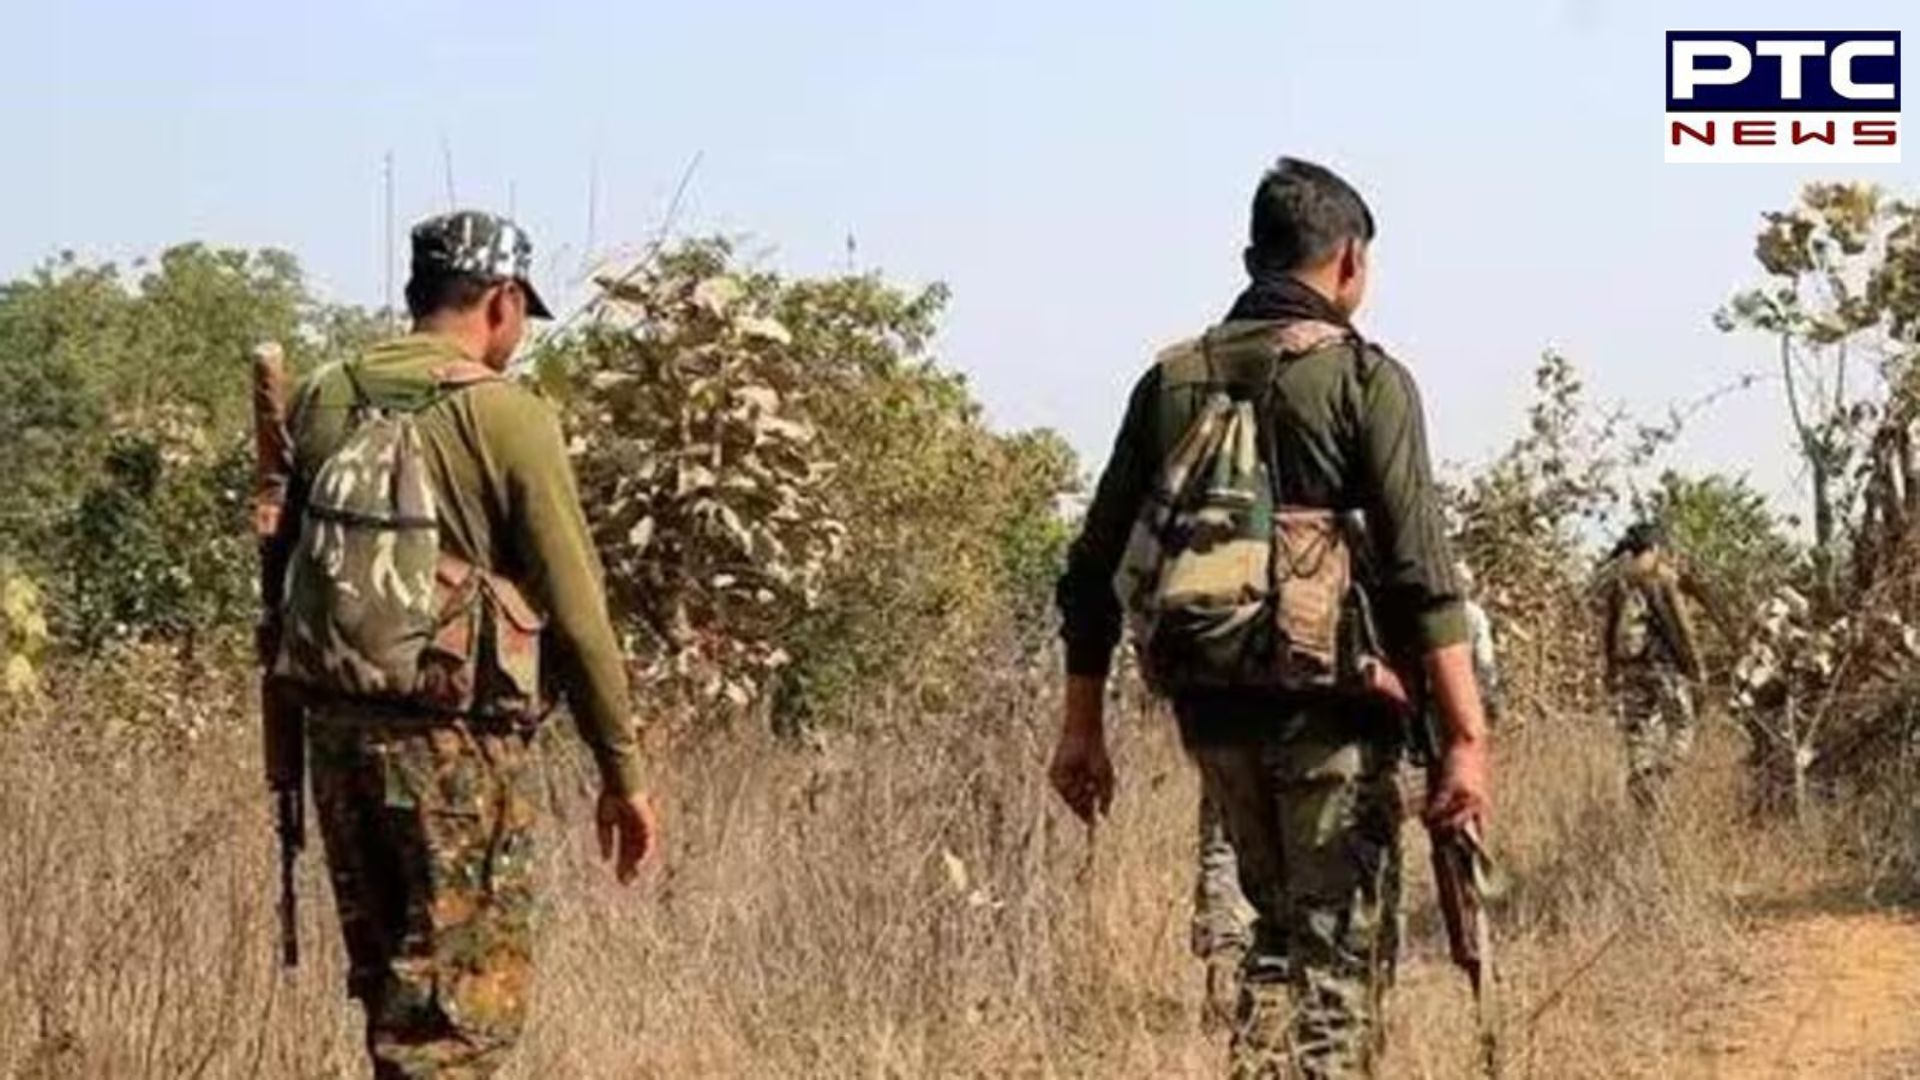 Security forces killed nine Maoists in Chhattisgarh encounter